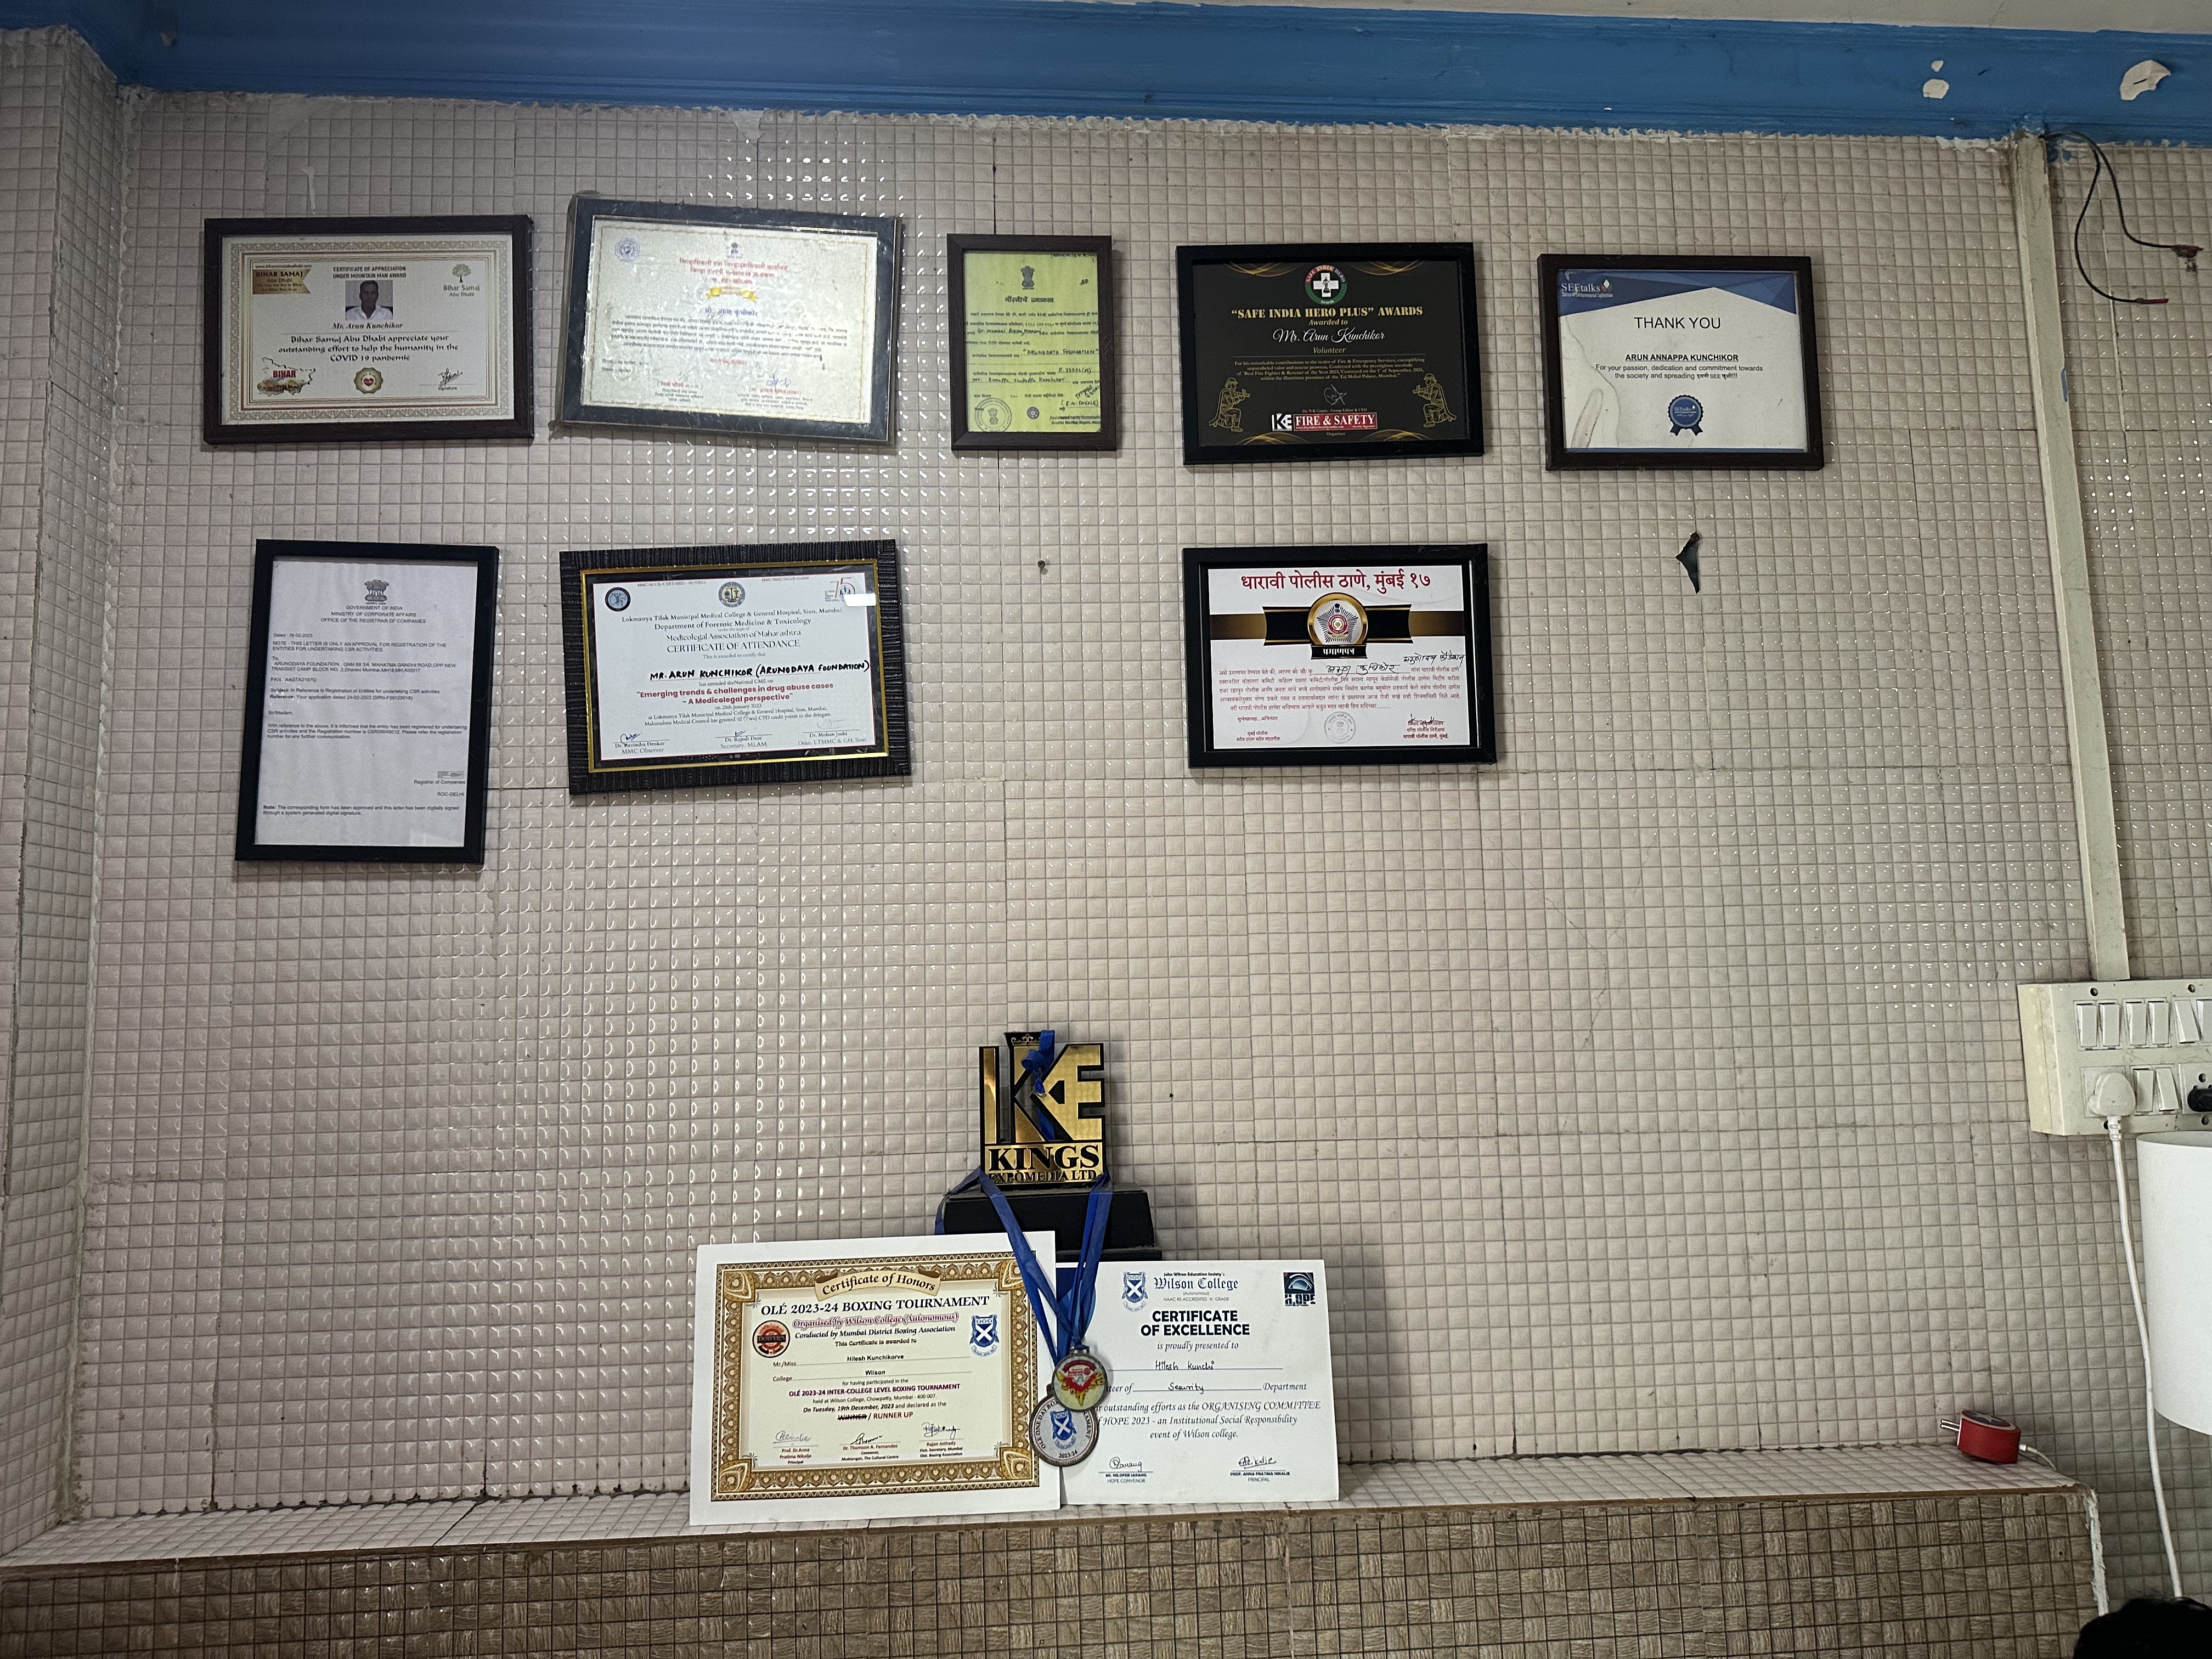 Arun's awards (up), his son's awards (down). They're competing with each other. 